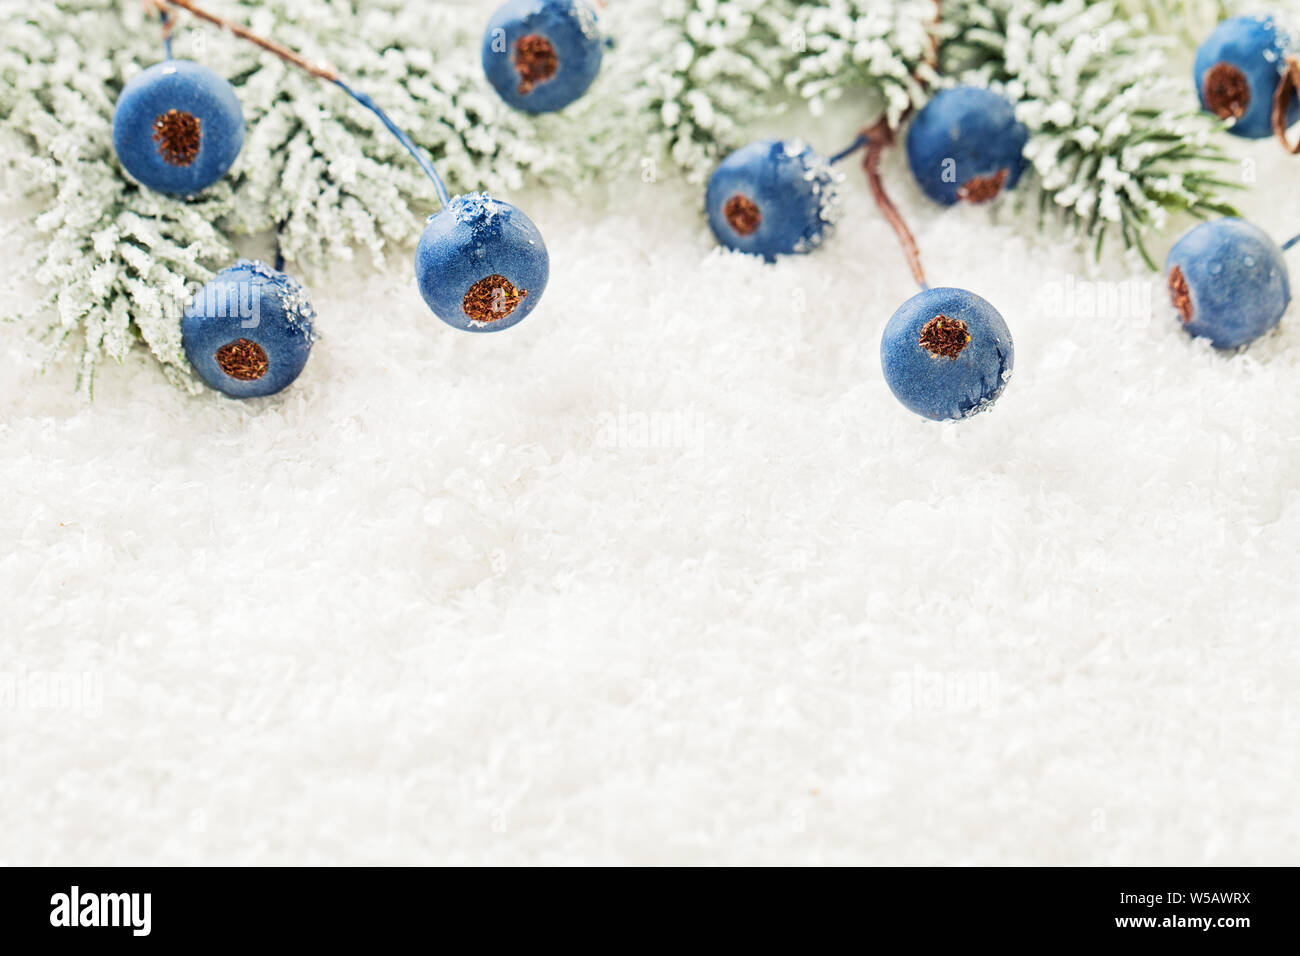 Christmas background with green fir branch, blue berries and snow close up Stock Photo